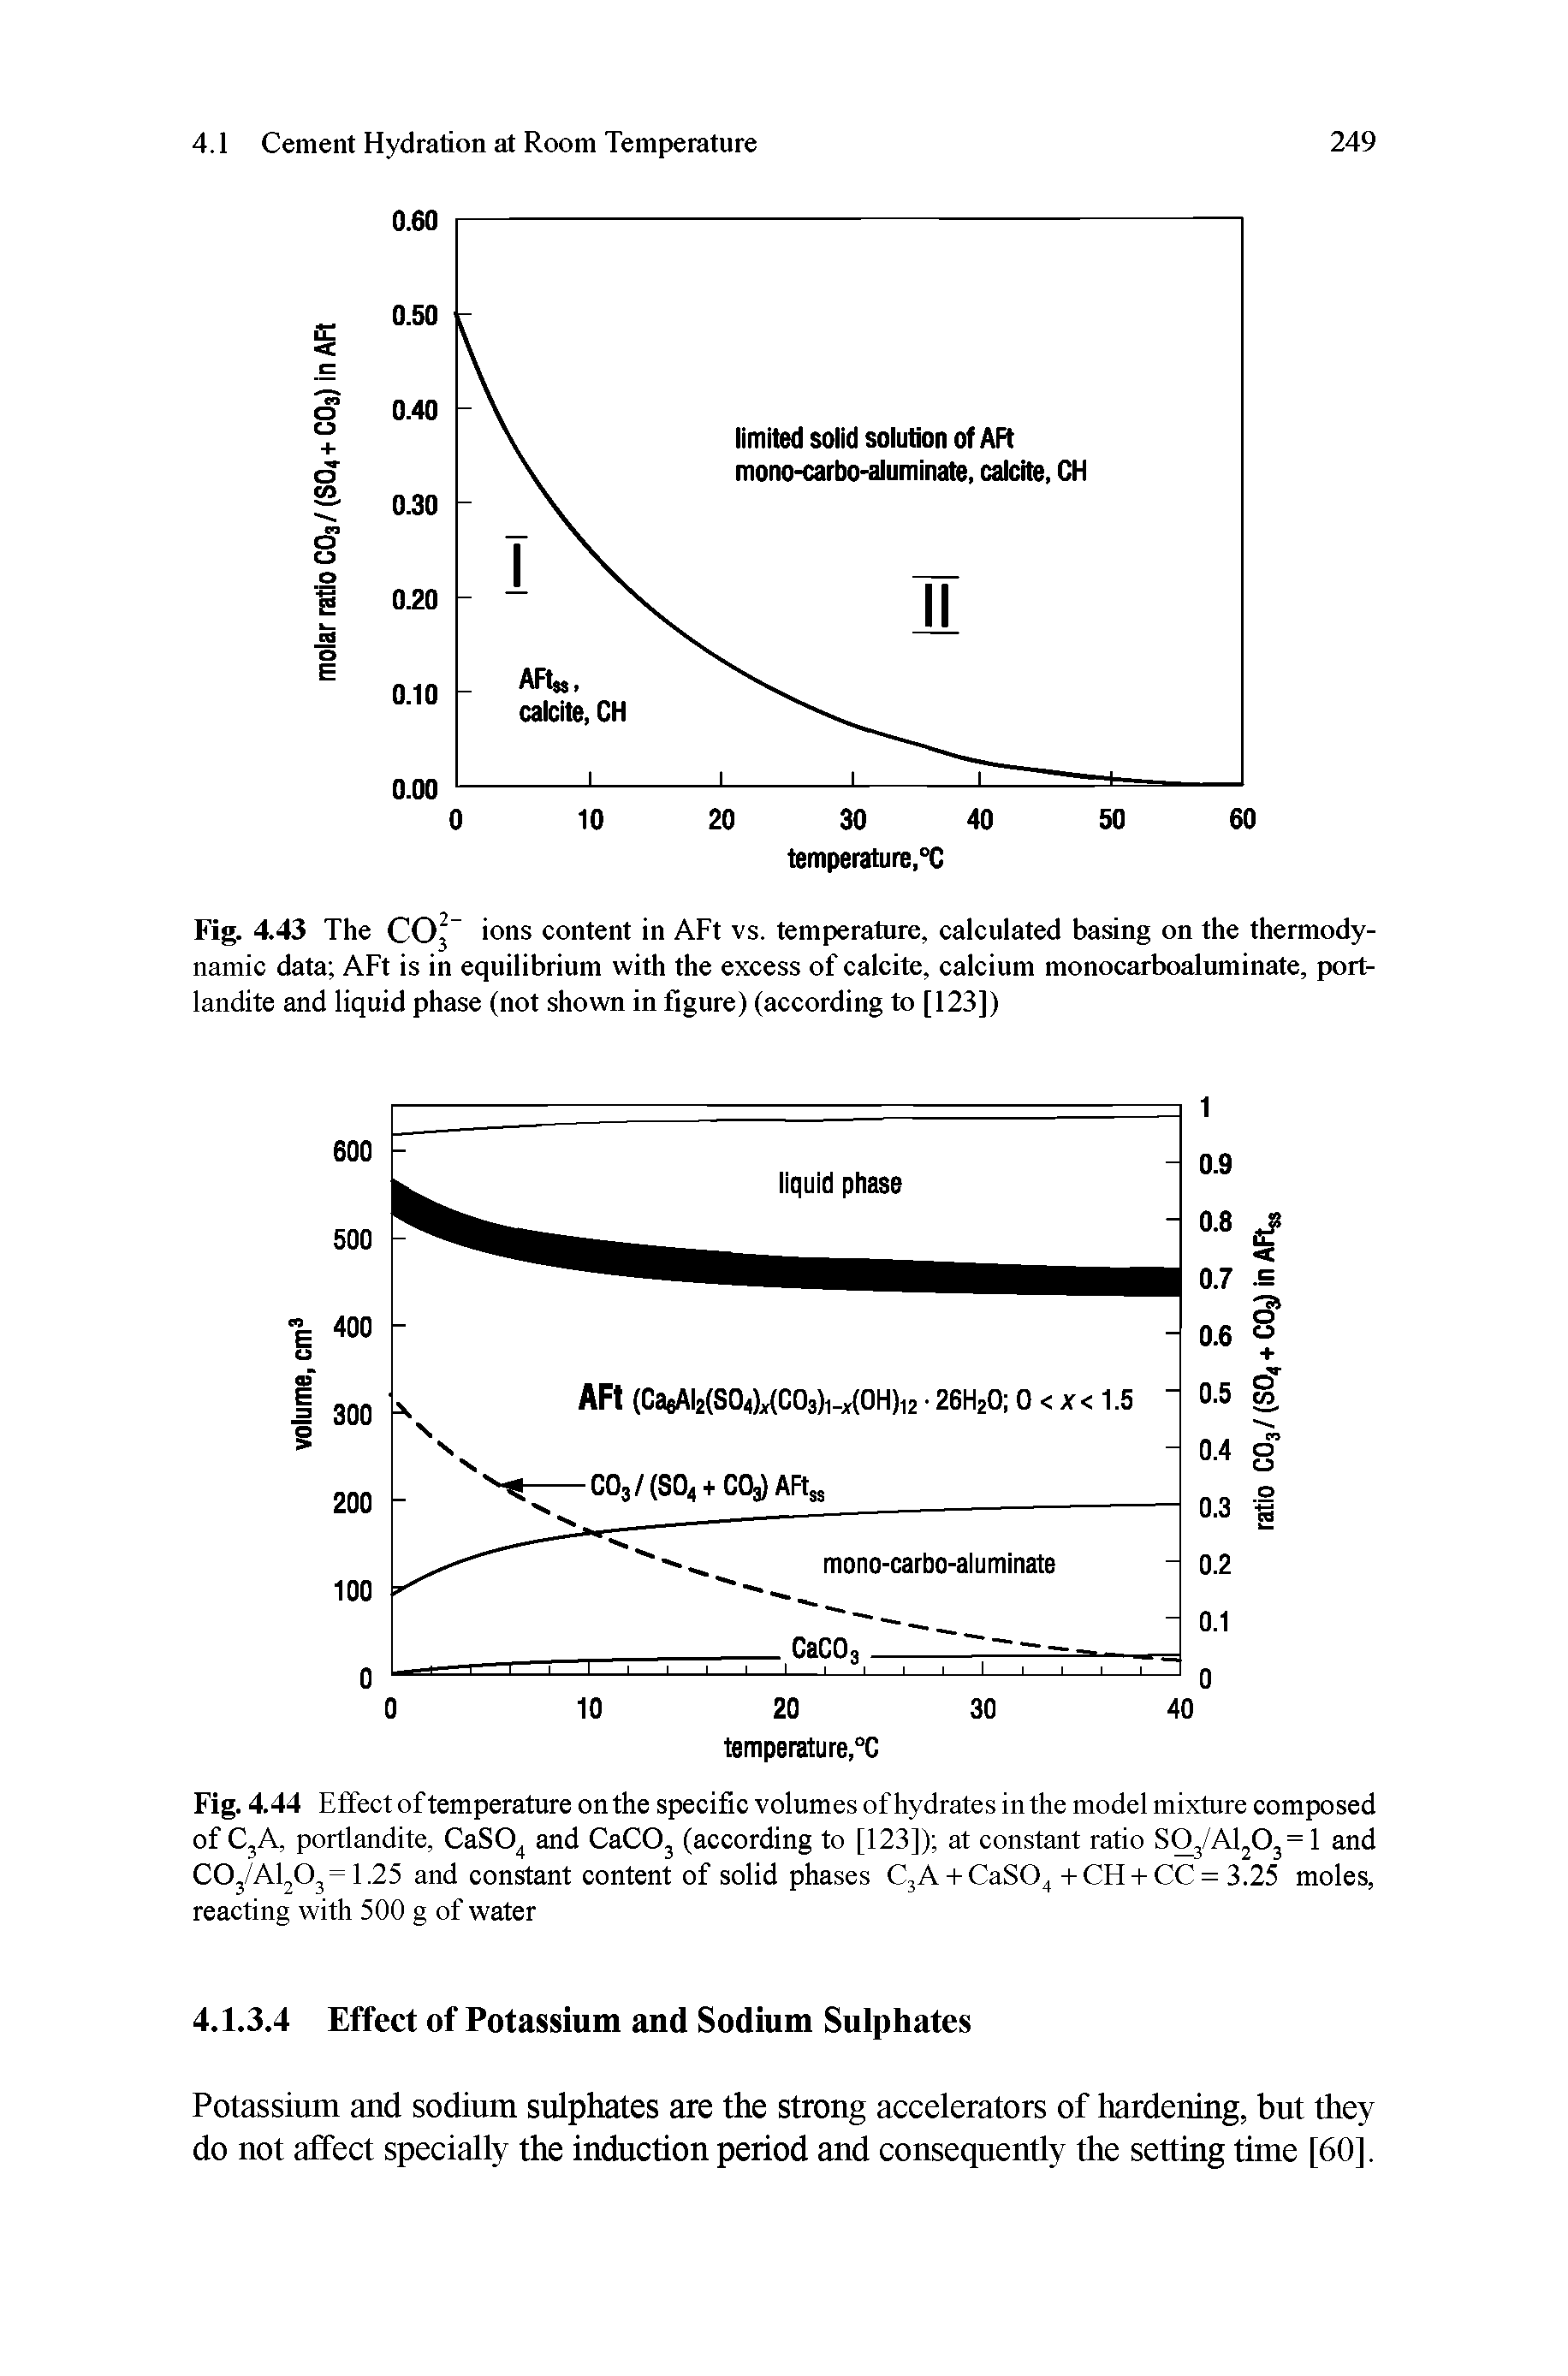 Fig. 4.43 The COj ions content in AFt vs. temperature, calculated basing on the thermodynamic data AFt is in equilibrium with the excess of calcite, calcium monocarboaluminate, port-landite and liquid phase (not shown in figure) (according to [123])...